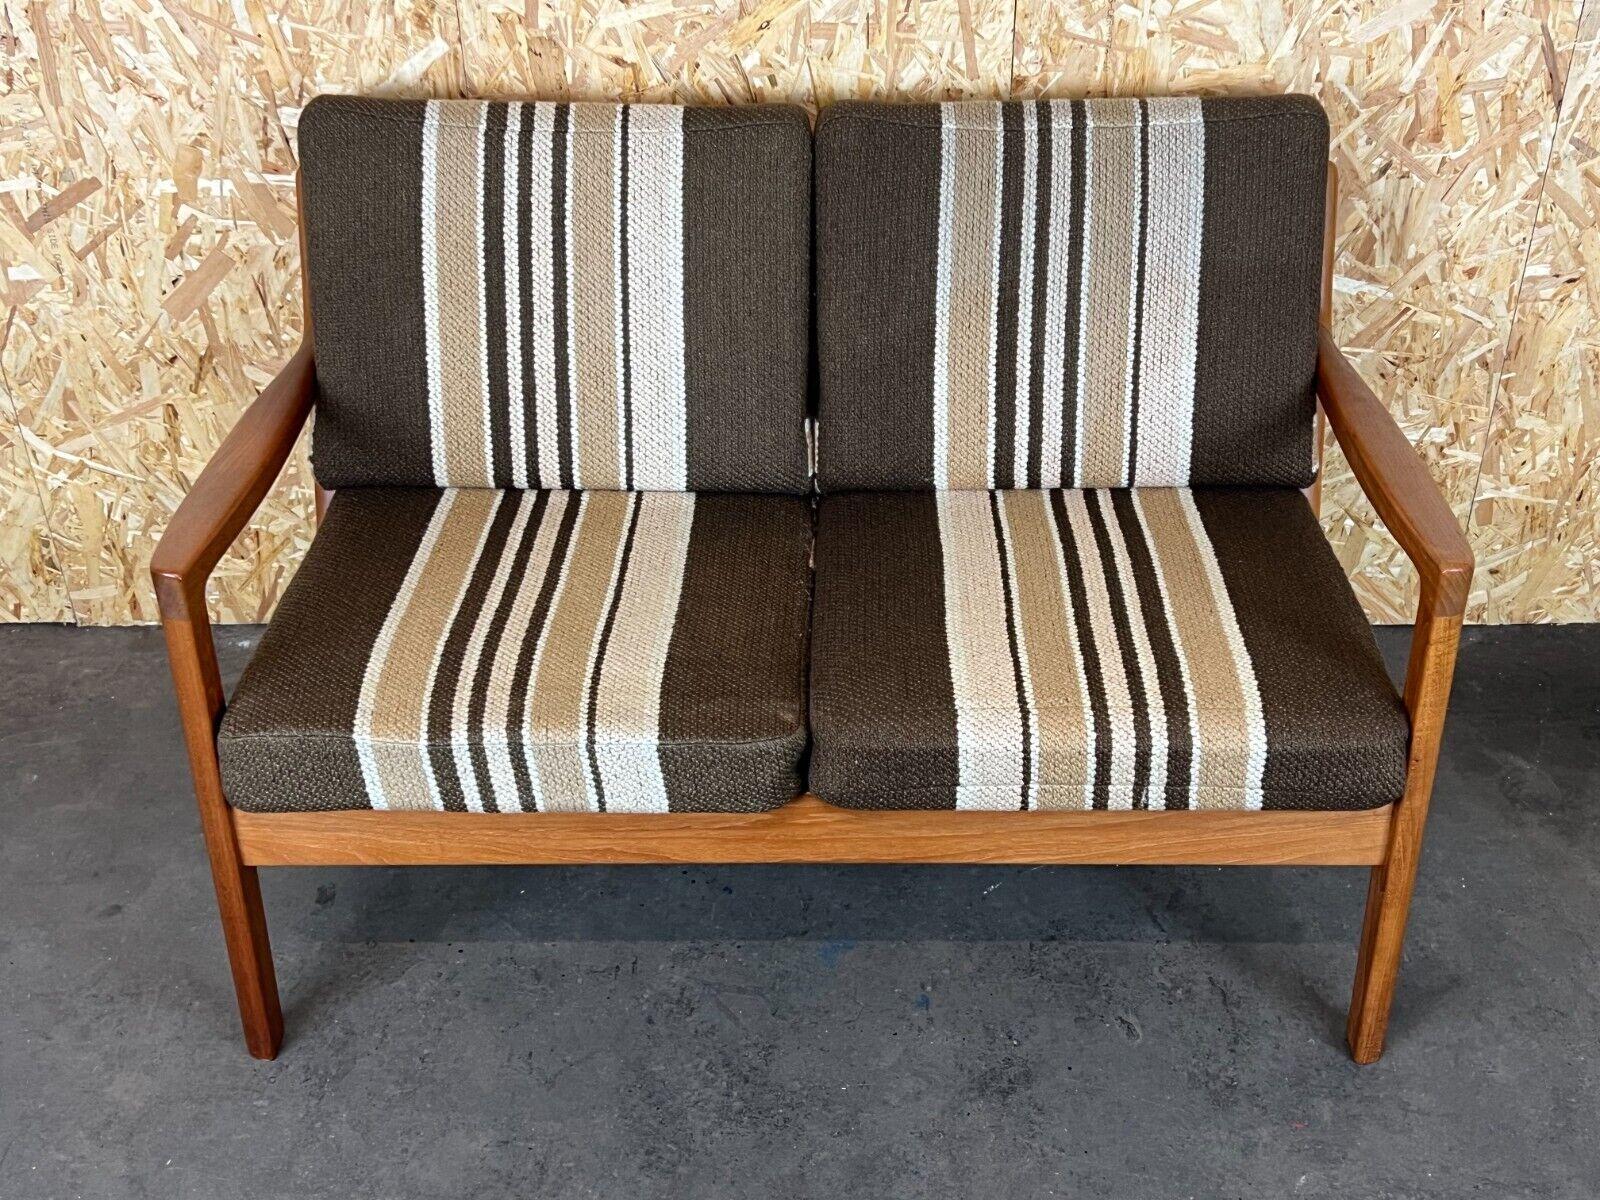 60s couch